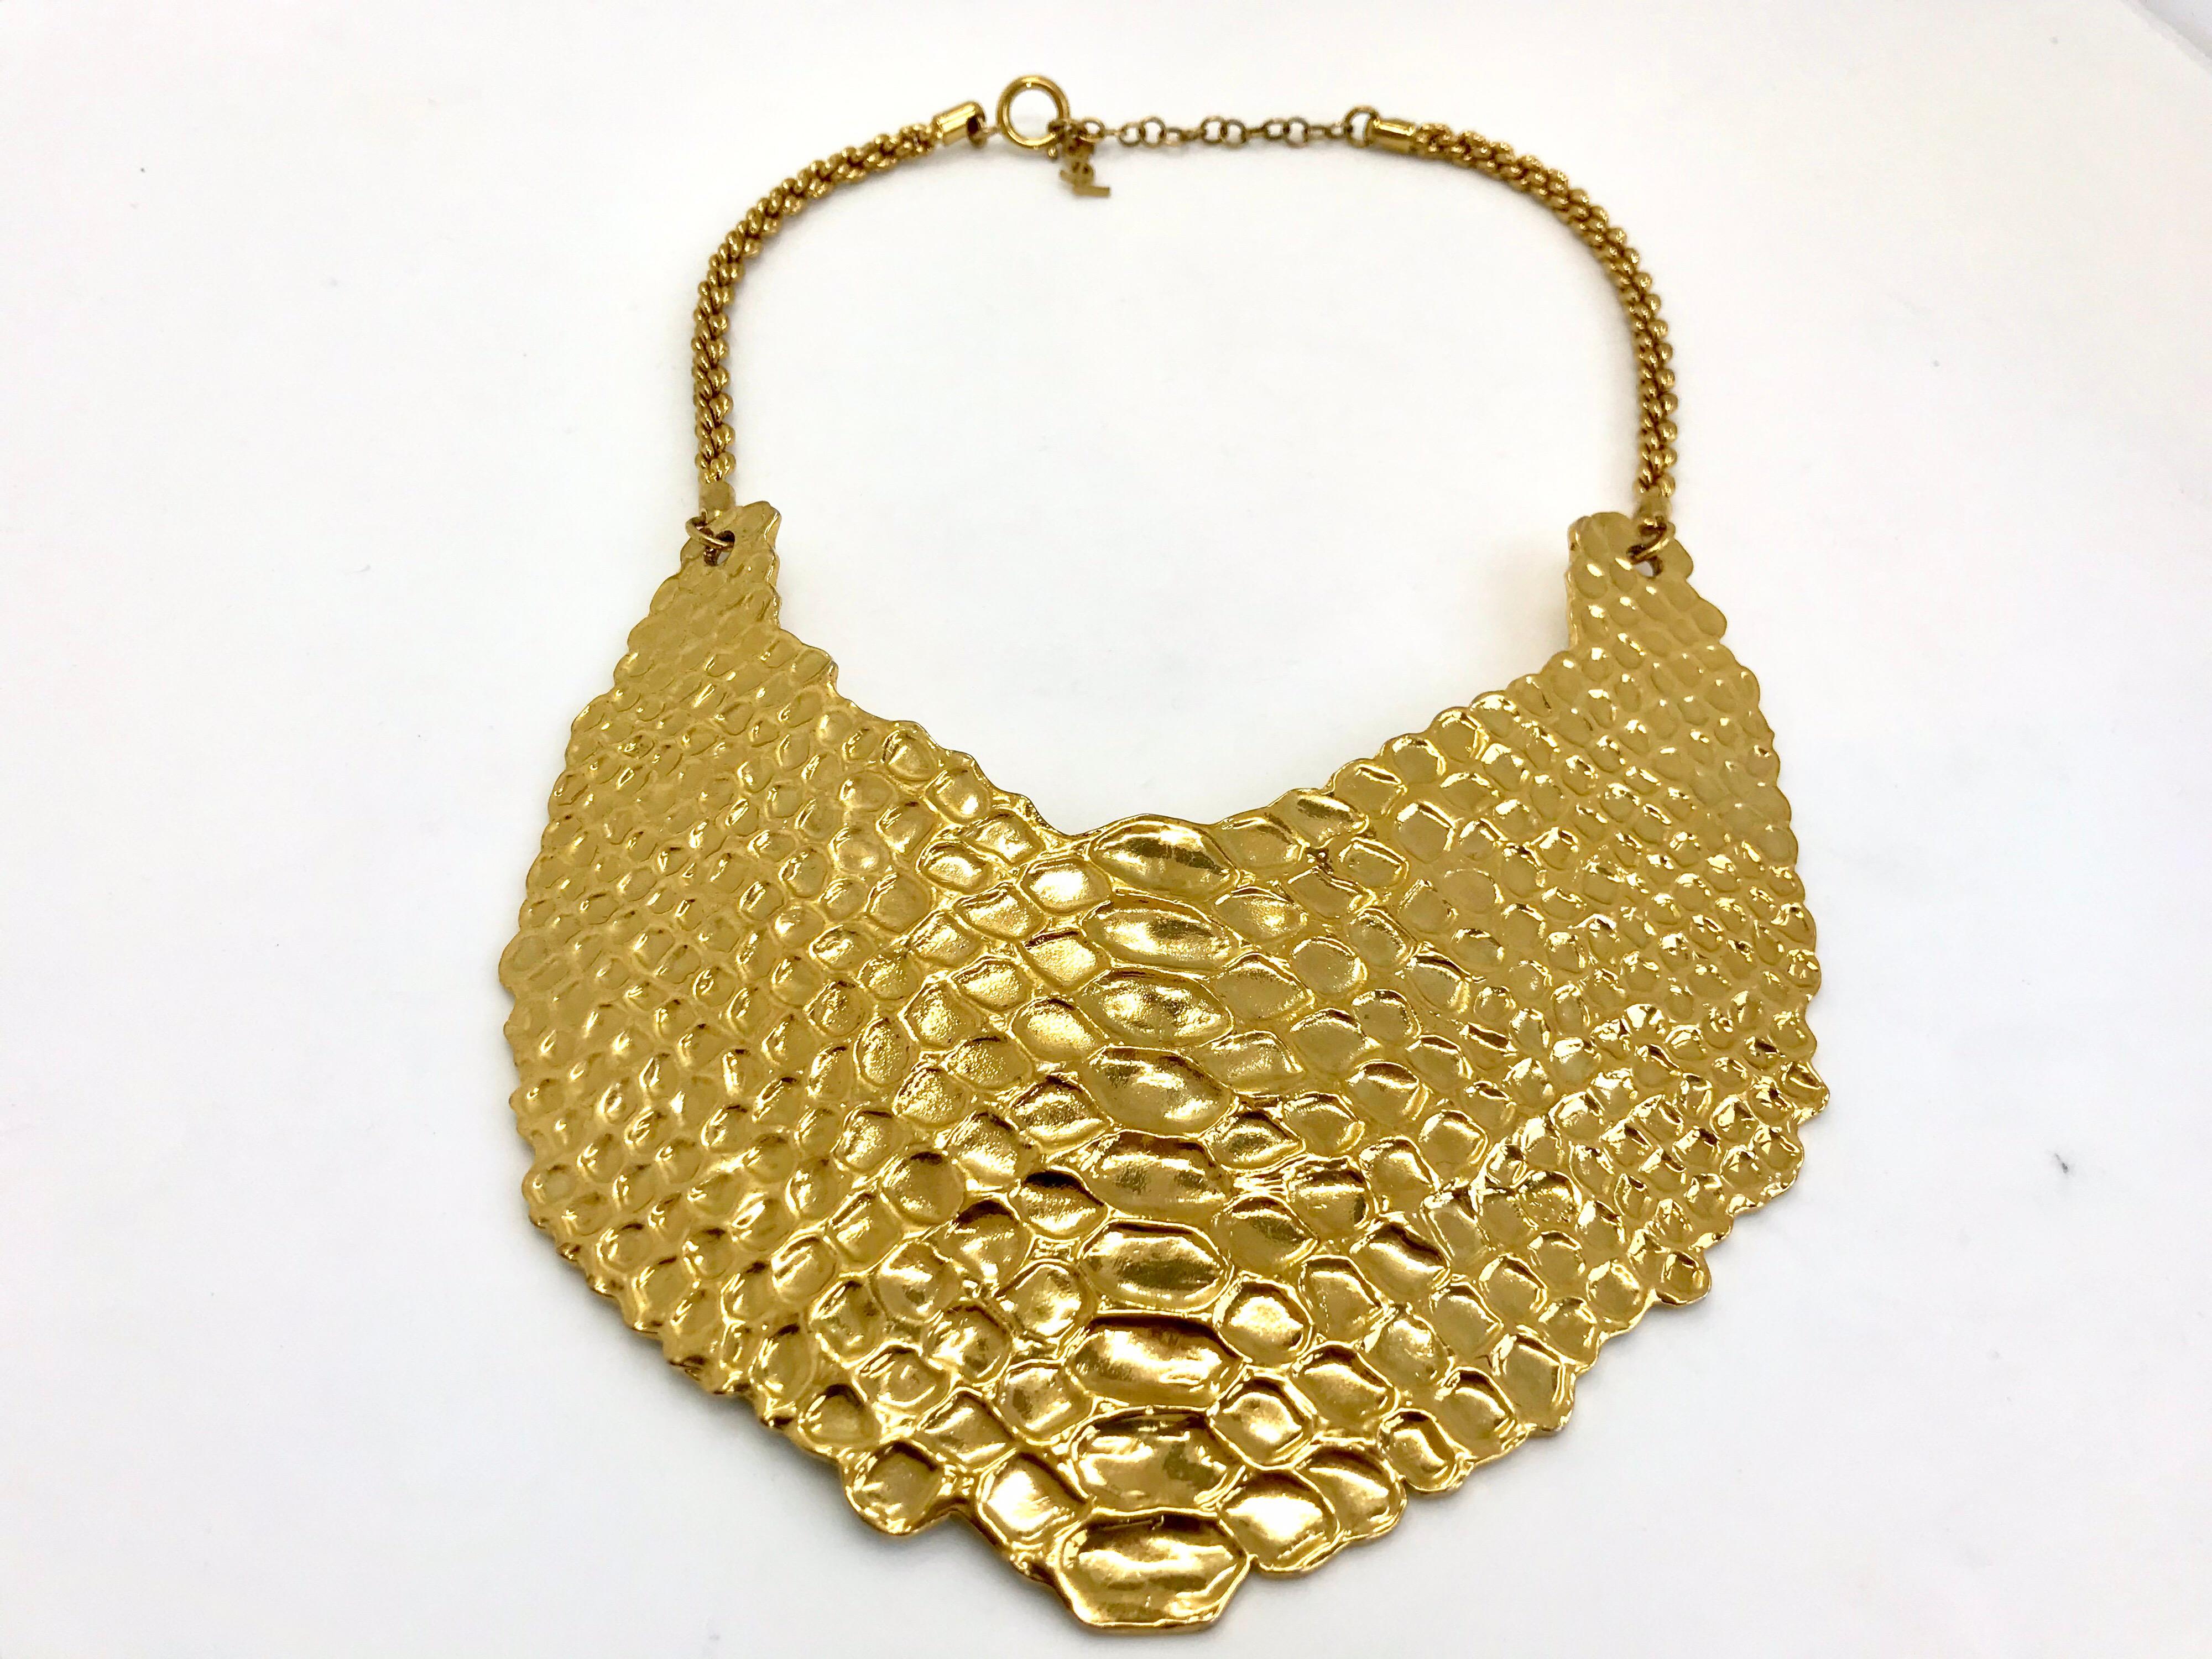 YSL Vintage Snakeskin Effect Statement Bib Necklace.  Stunning carved reptile skin design on an antiqued gold-tone setting.

Signed YSL on hangtag from lobster clasp.

A real show stopping piece!

Measurements:
width - 5.5 inches
length 3.5